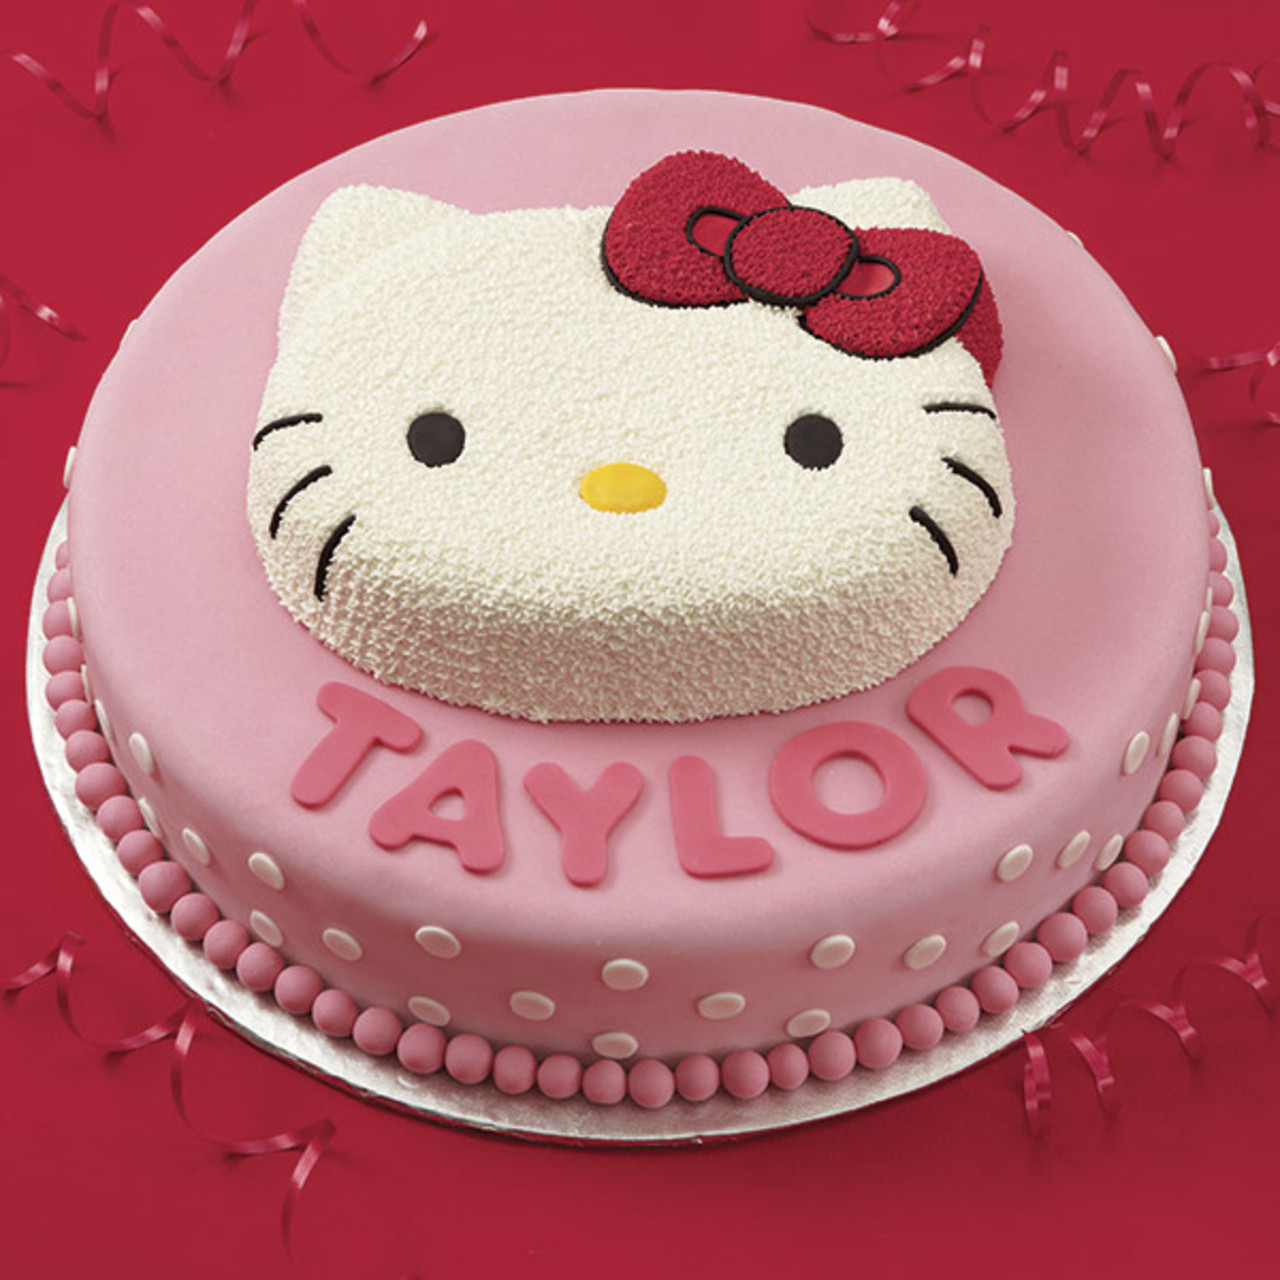 Red round hello kitty with star cake decor.PNG (2 comments)